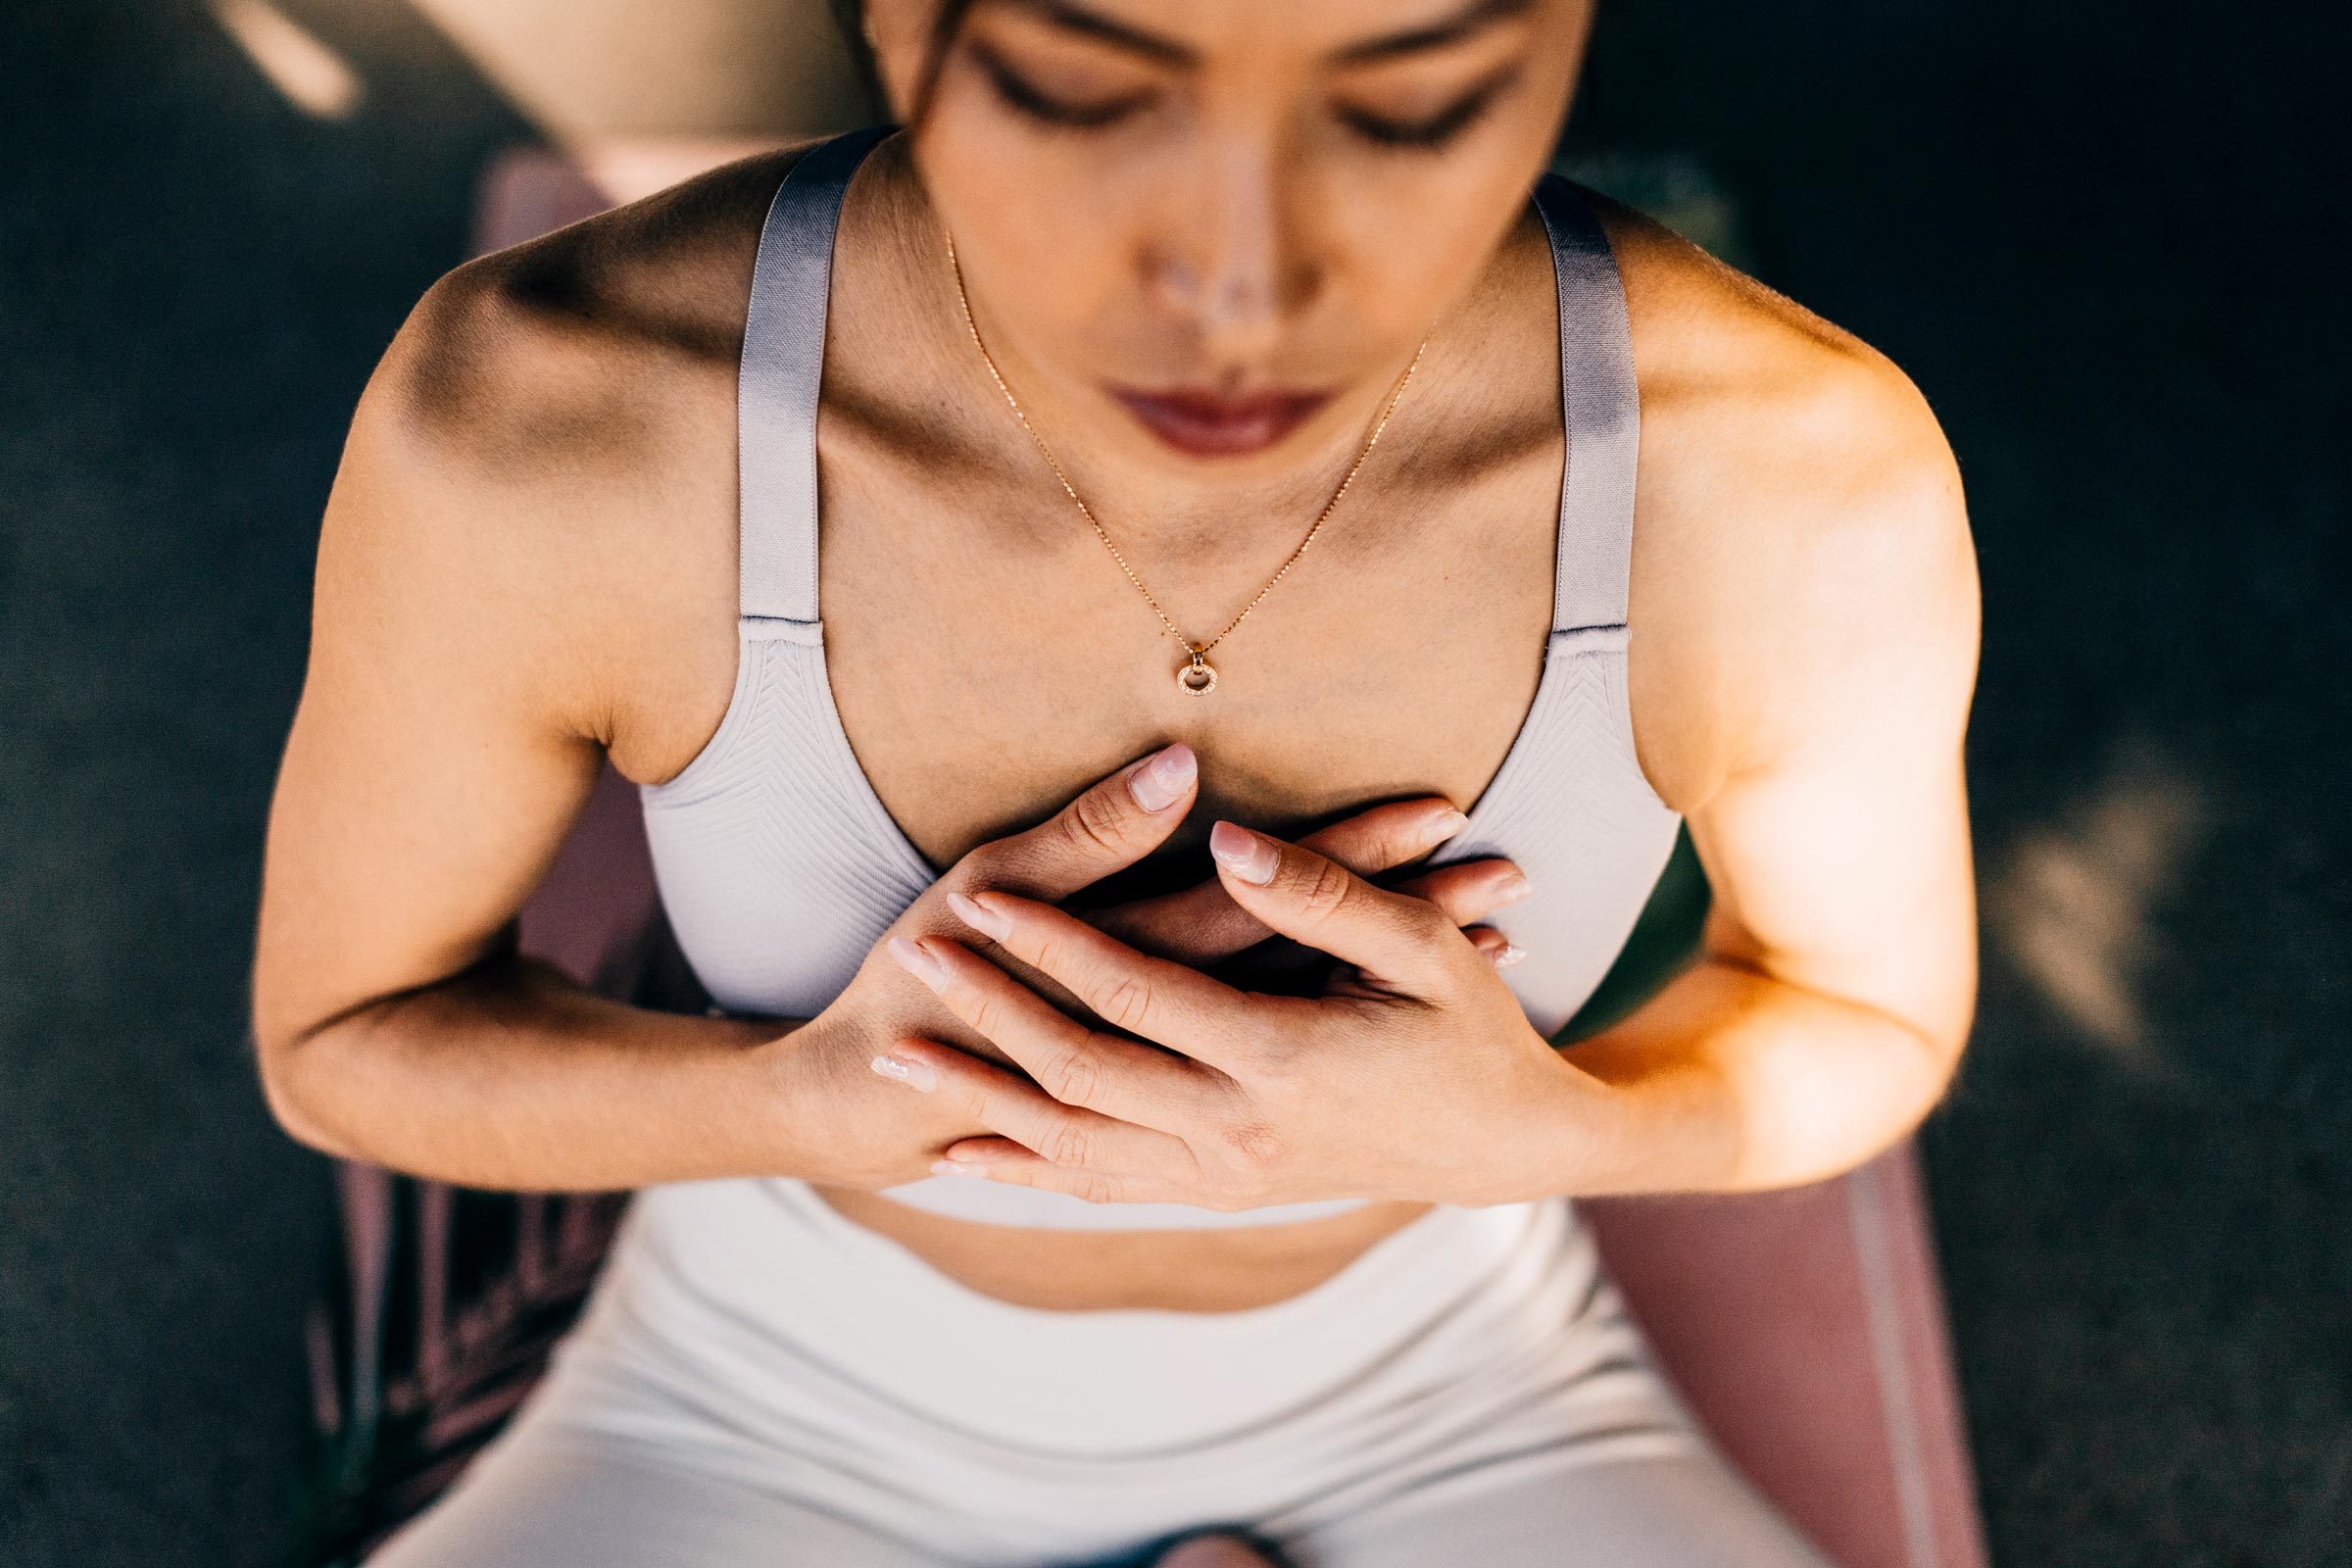 woman with anxiety is doing yoga or meditating is holding her chest while breathing